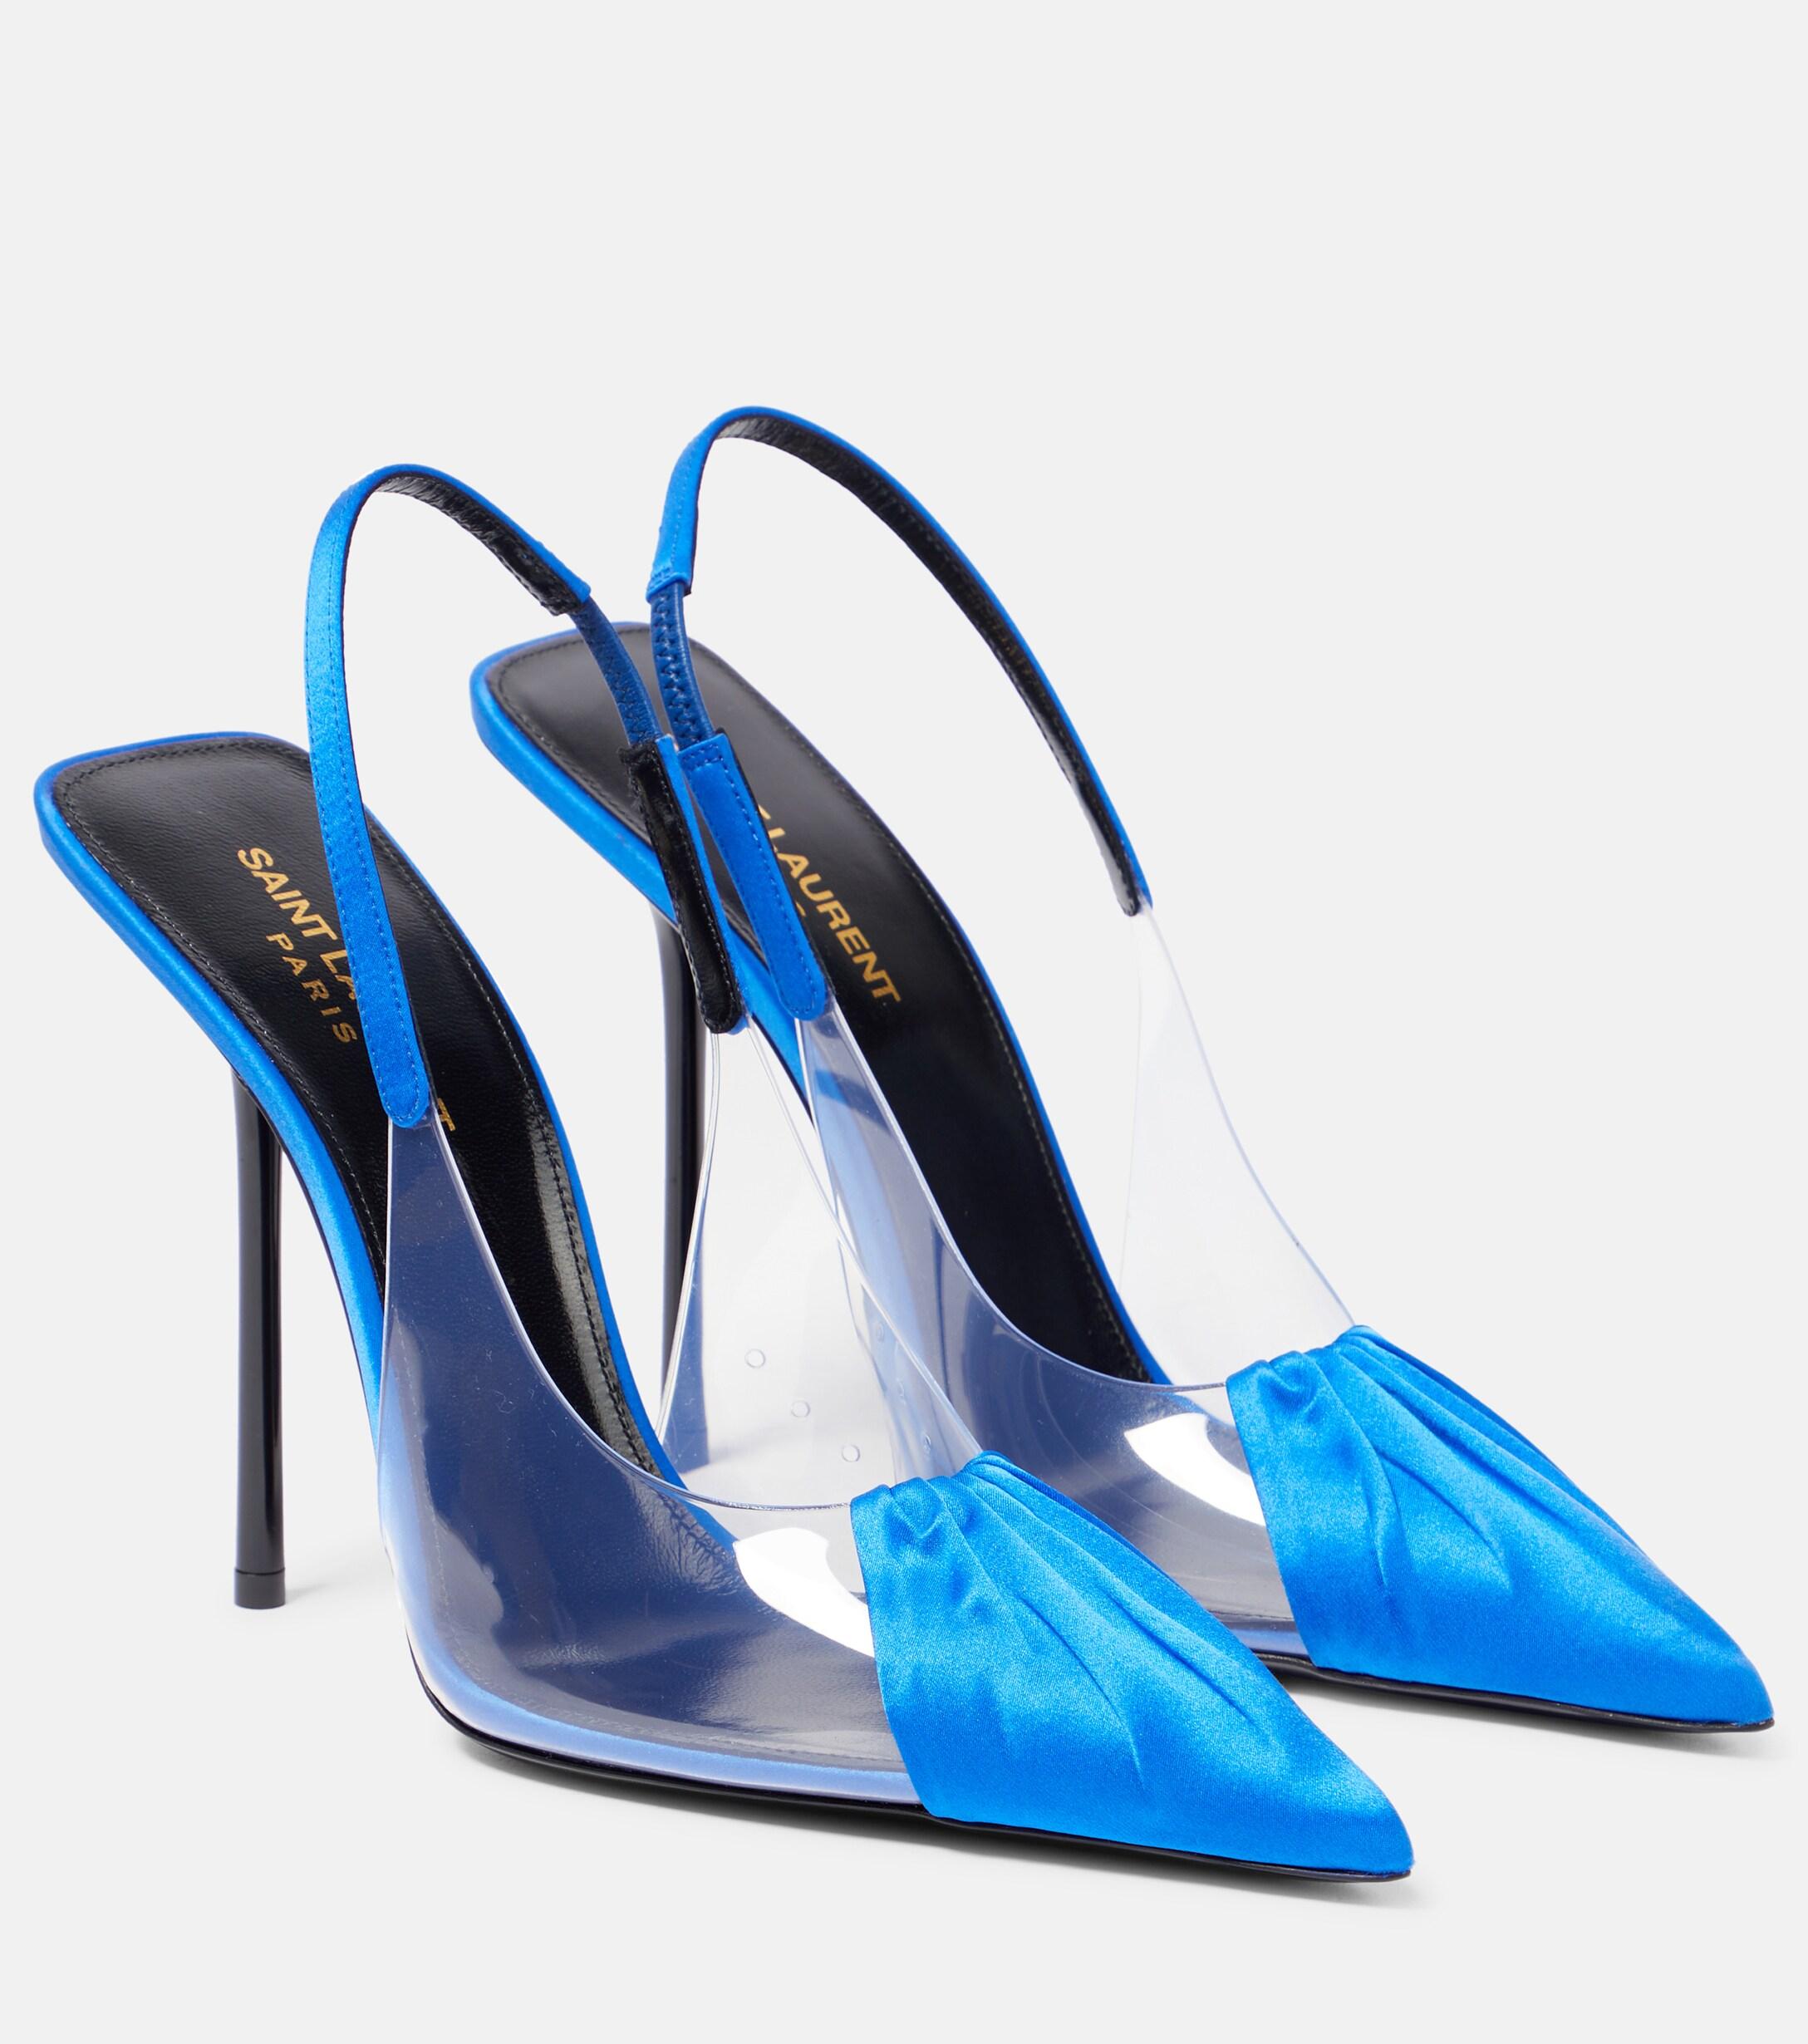 Saint Laurent Chica Pvc And Satin Slingback Pumps in Blue | Lyst UK